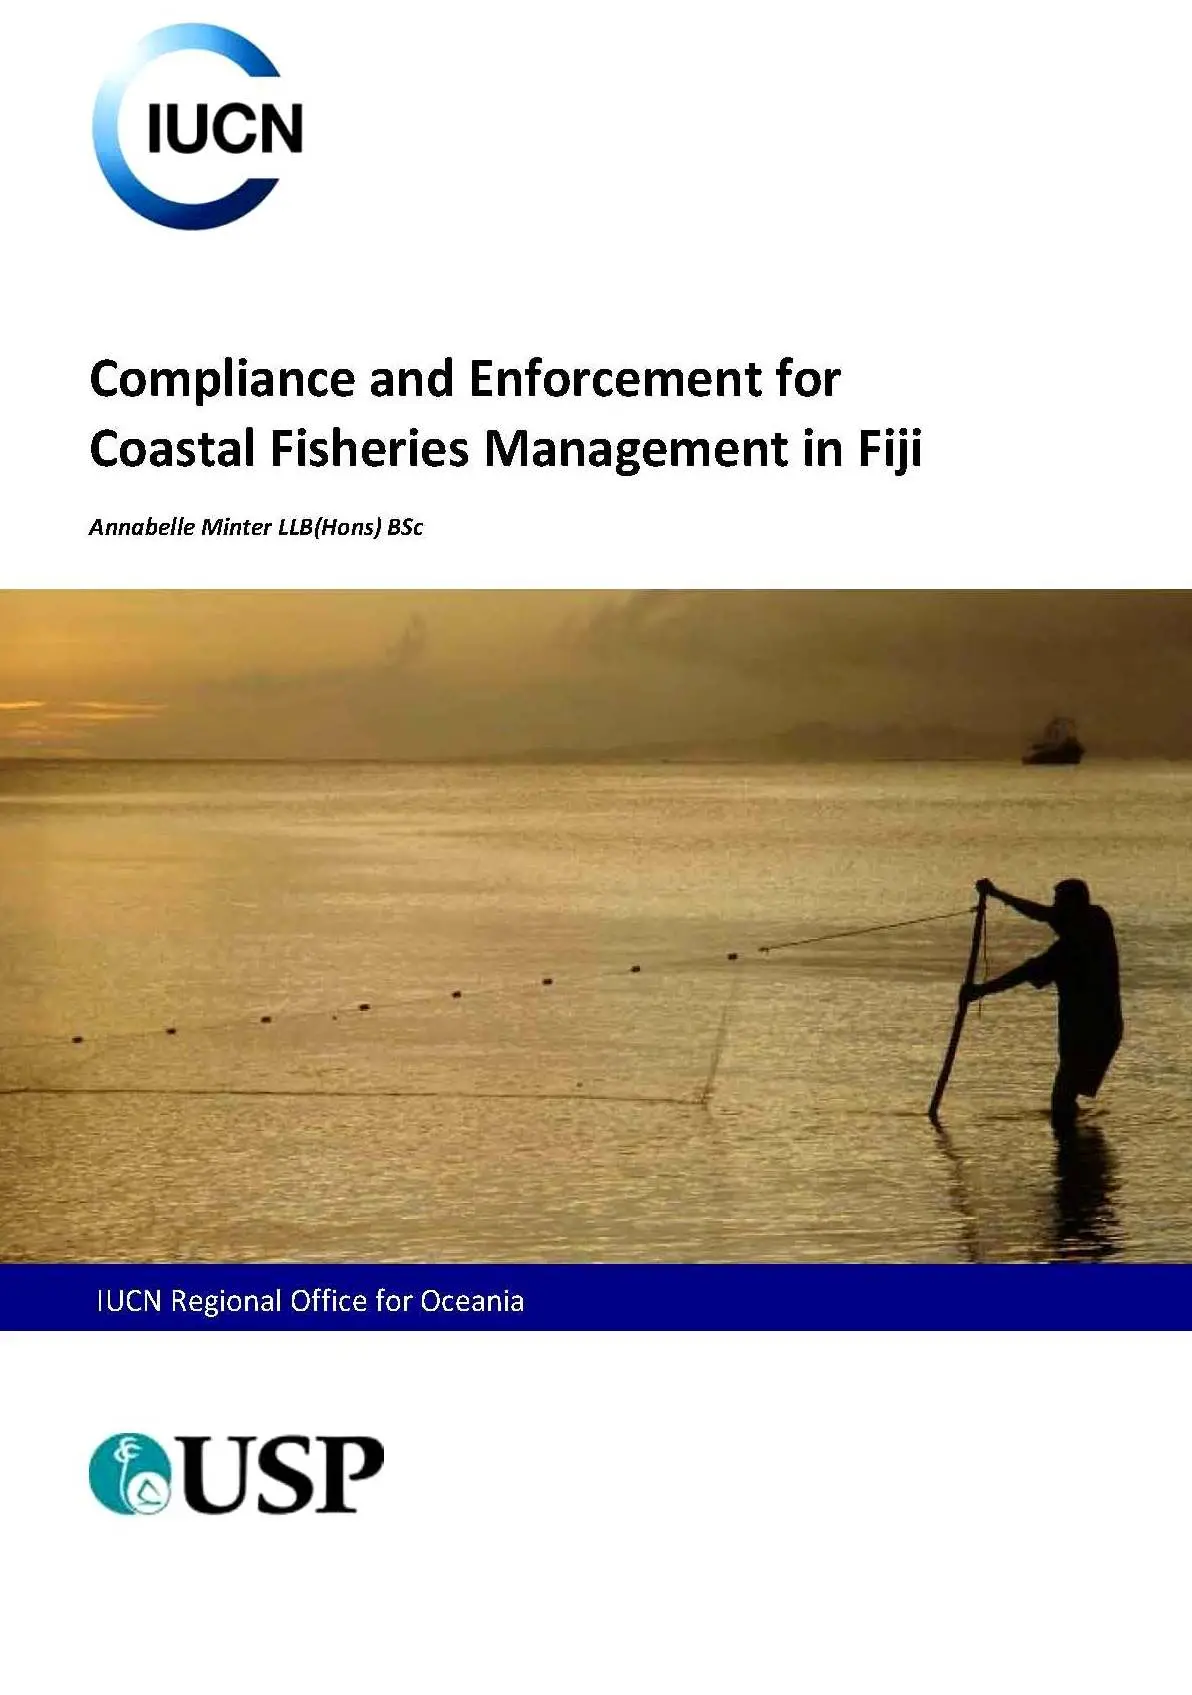 fisheries_compliance_and_enforcement_081117_1.jpg